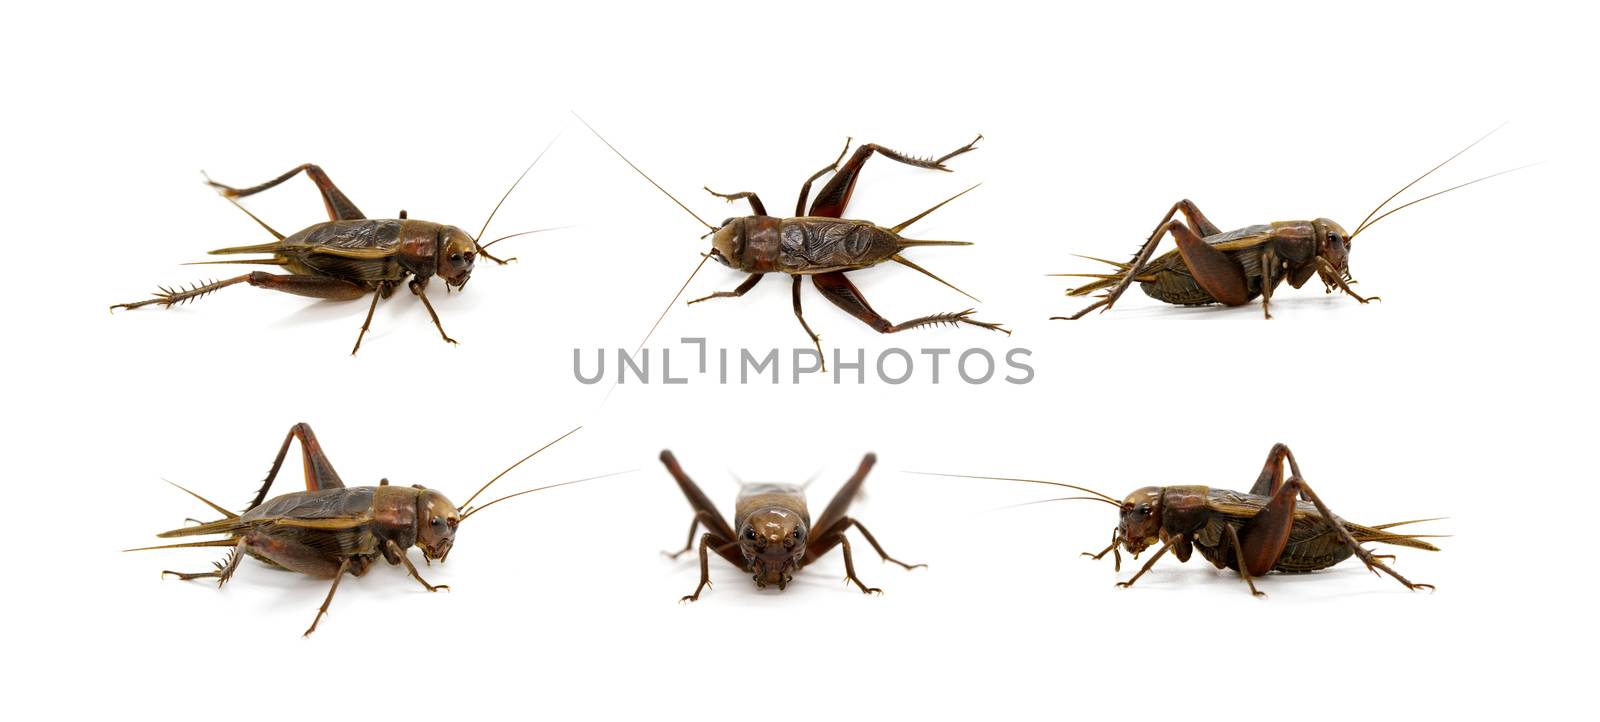 Group of cricket on white background., Insects. Animals.